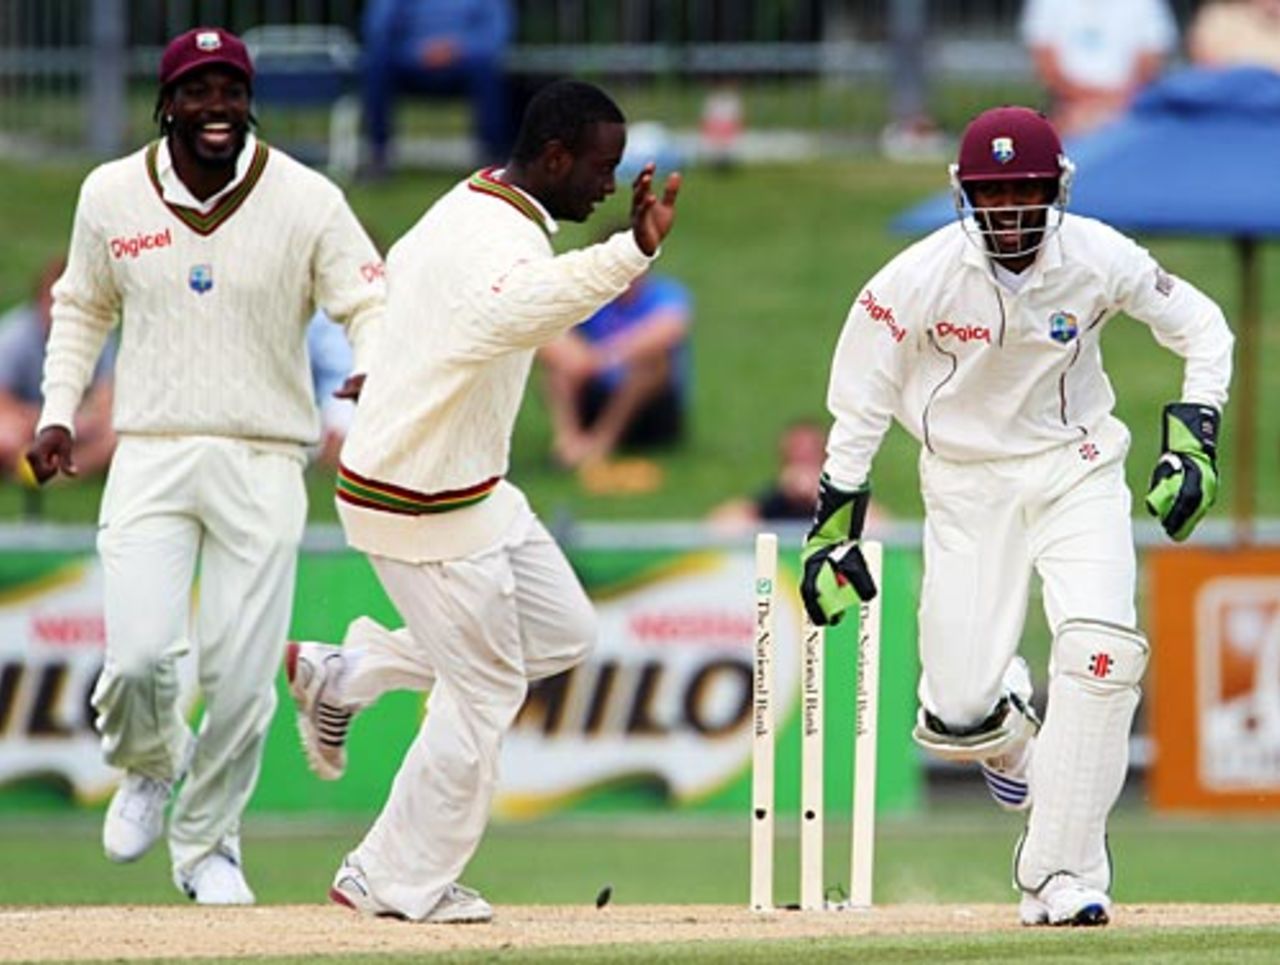 West Indies players celebrate Daniel Flynn's run-out, New Zealand v West Indies, 2nd Test, Napier, 5th day, December 23, 2008